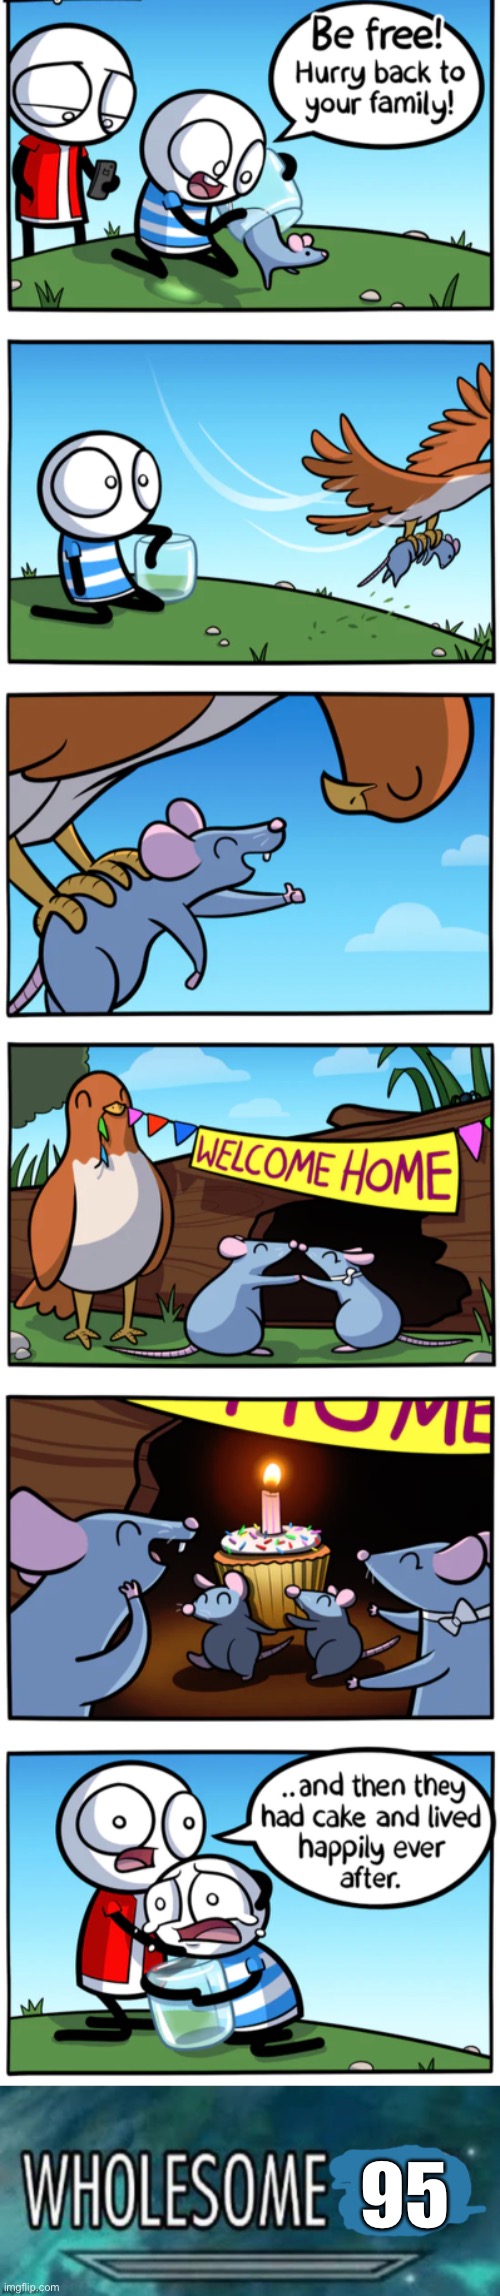 Not quite 100 | 95 | image tagged in wholesome,bird,mouse | made w/ Imgflip meme maker